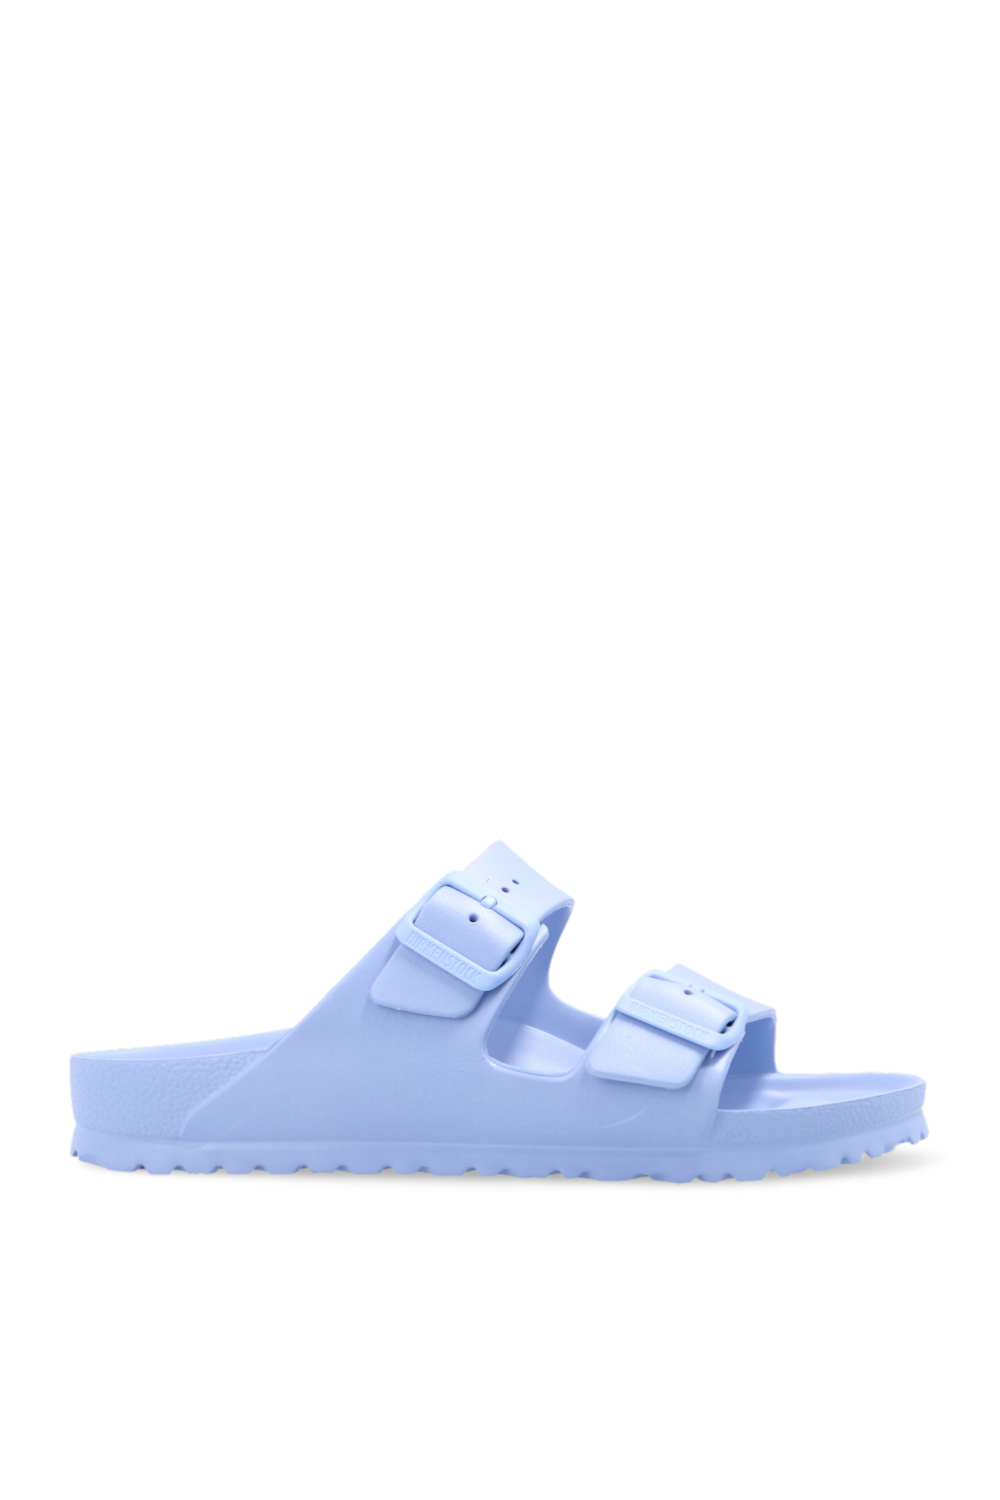 Cor Sport Slippers Pool in EVA Article 6052 Color 20 Blue 